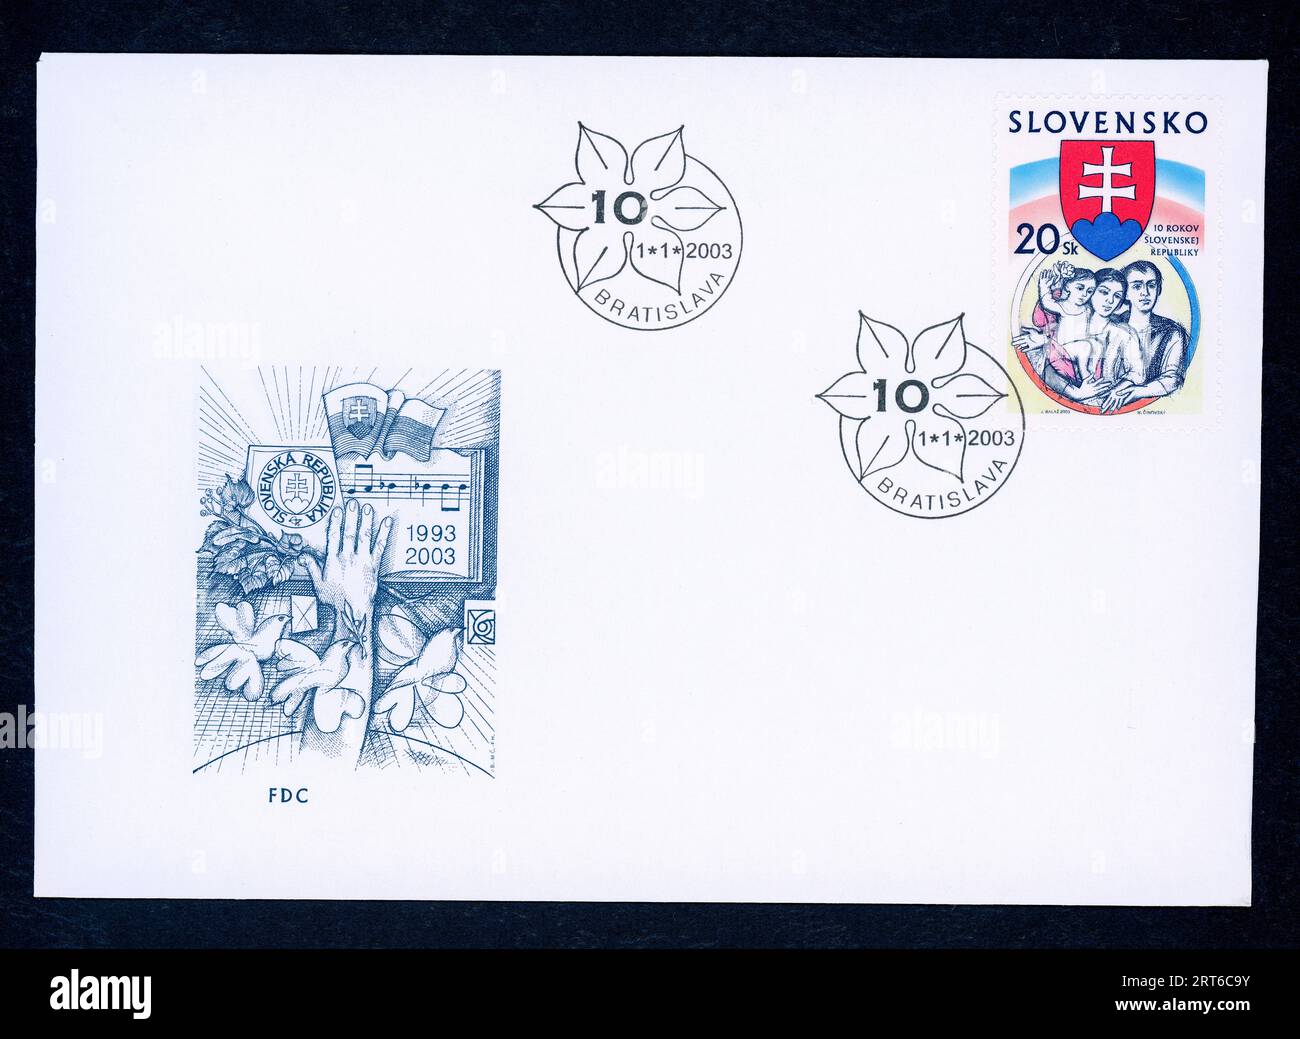 10th Anniversary of the Slovak Republic. First day of issue envelope and postage stamp issued in Slovakia in 2003. Stock Photo